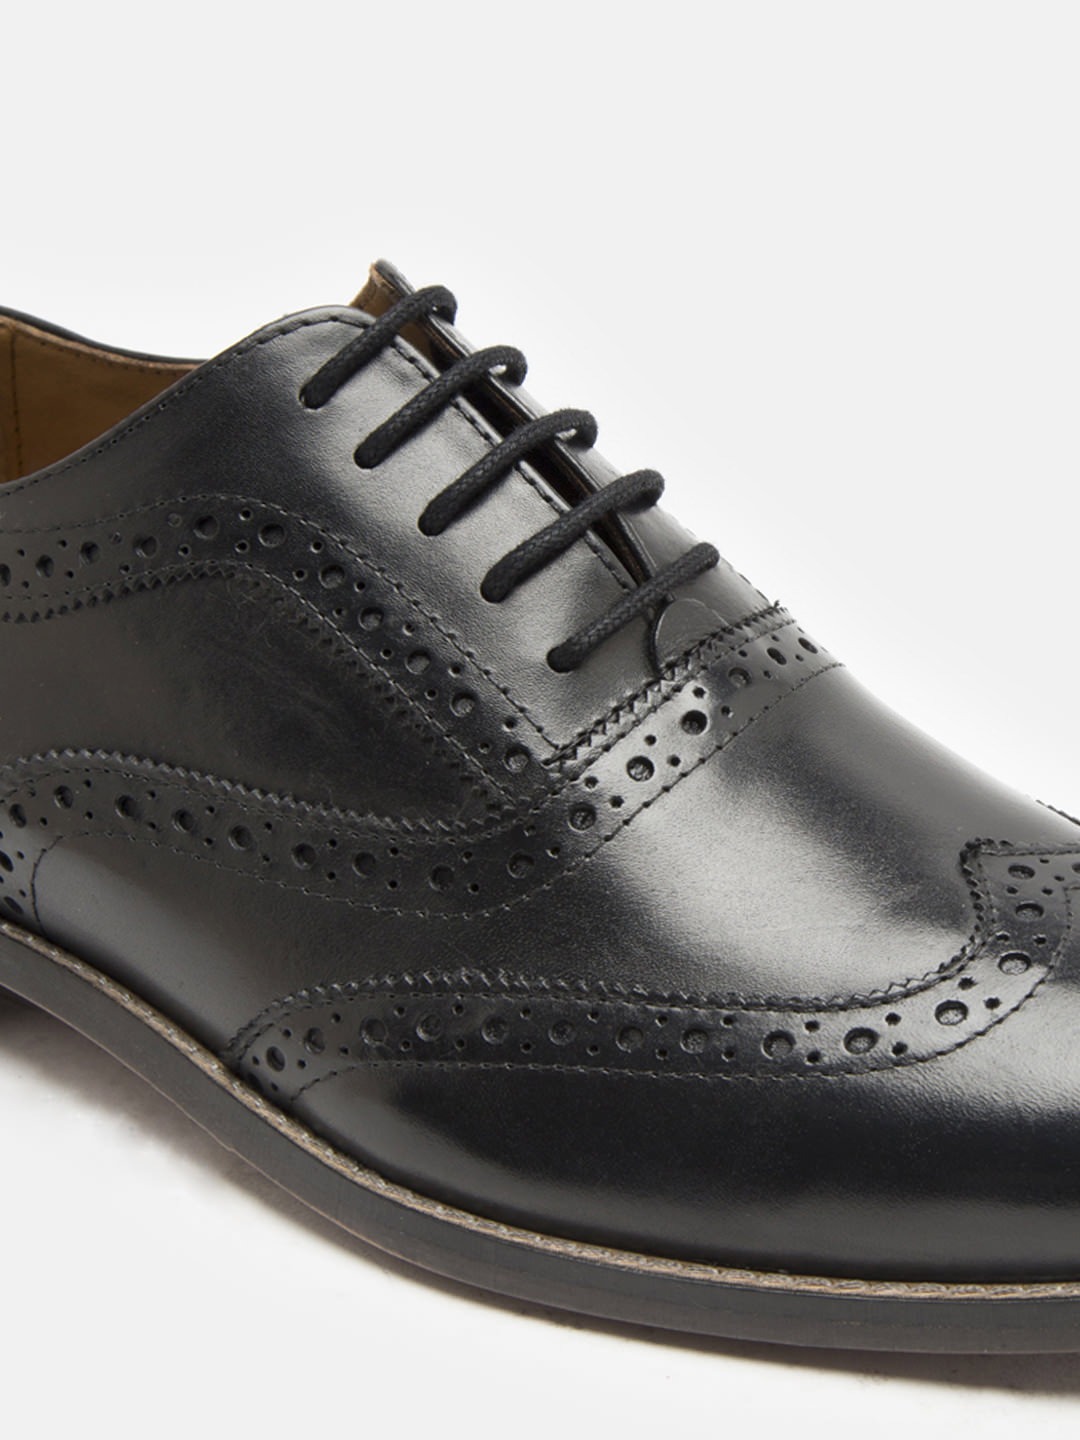 Buy Genuine Leather Black Brogues Shoes by Hats Off Accessories